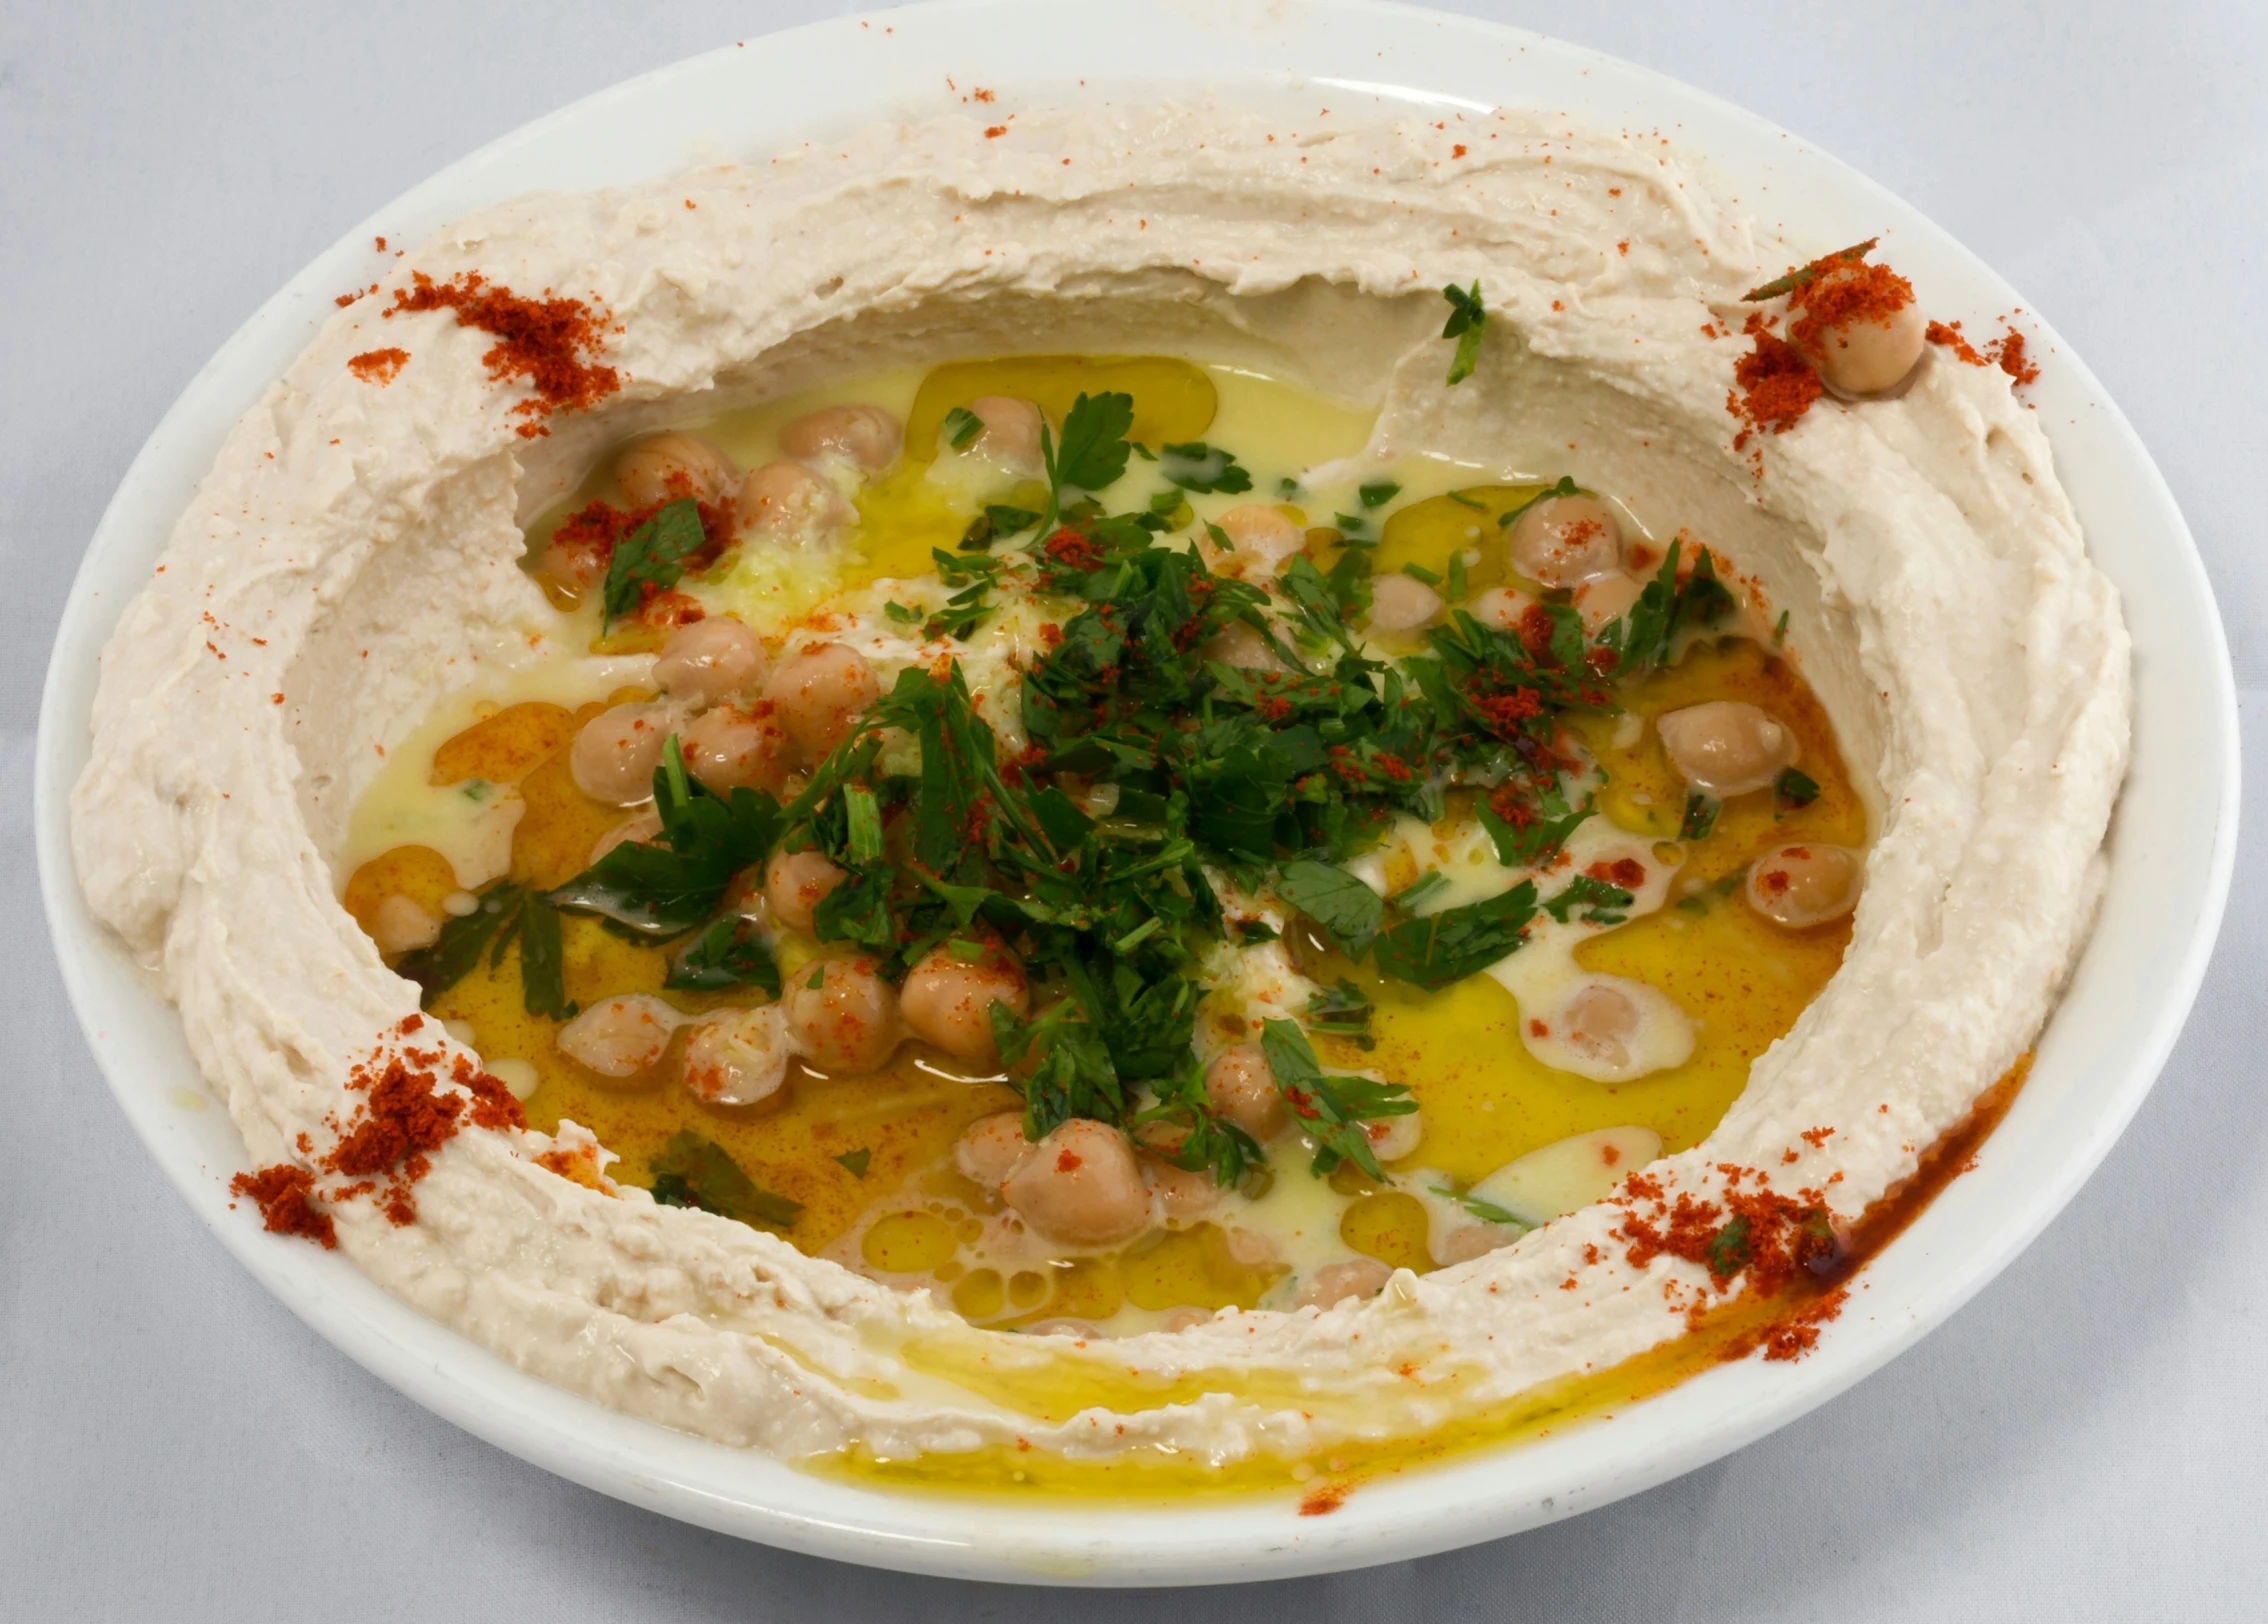 an image of a plate of hummus and other ingredients